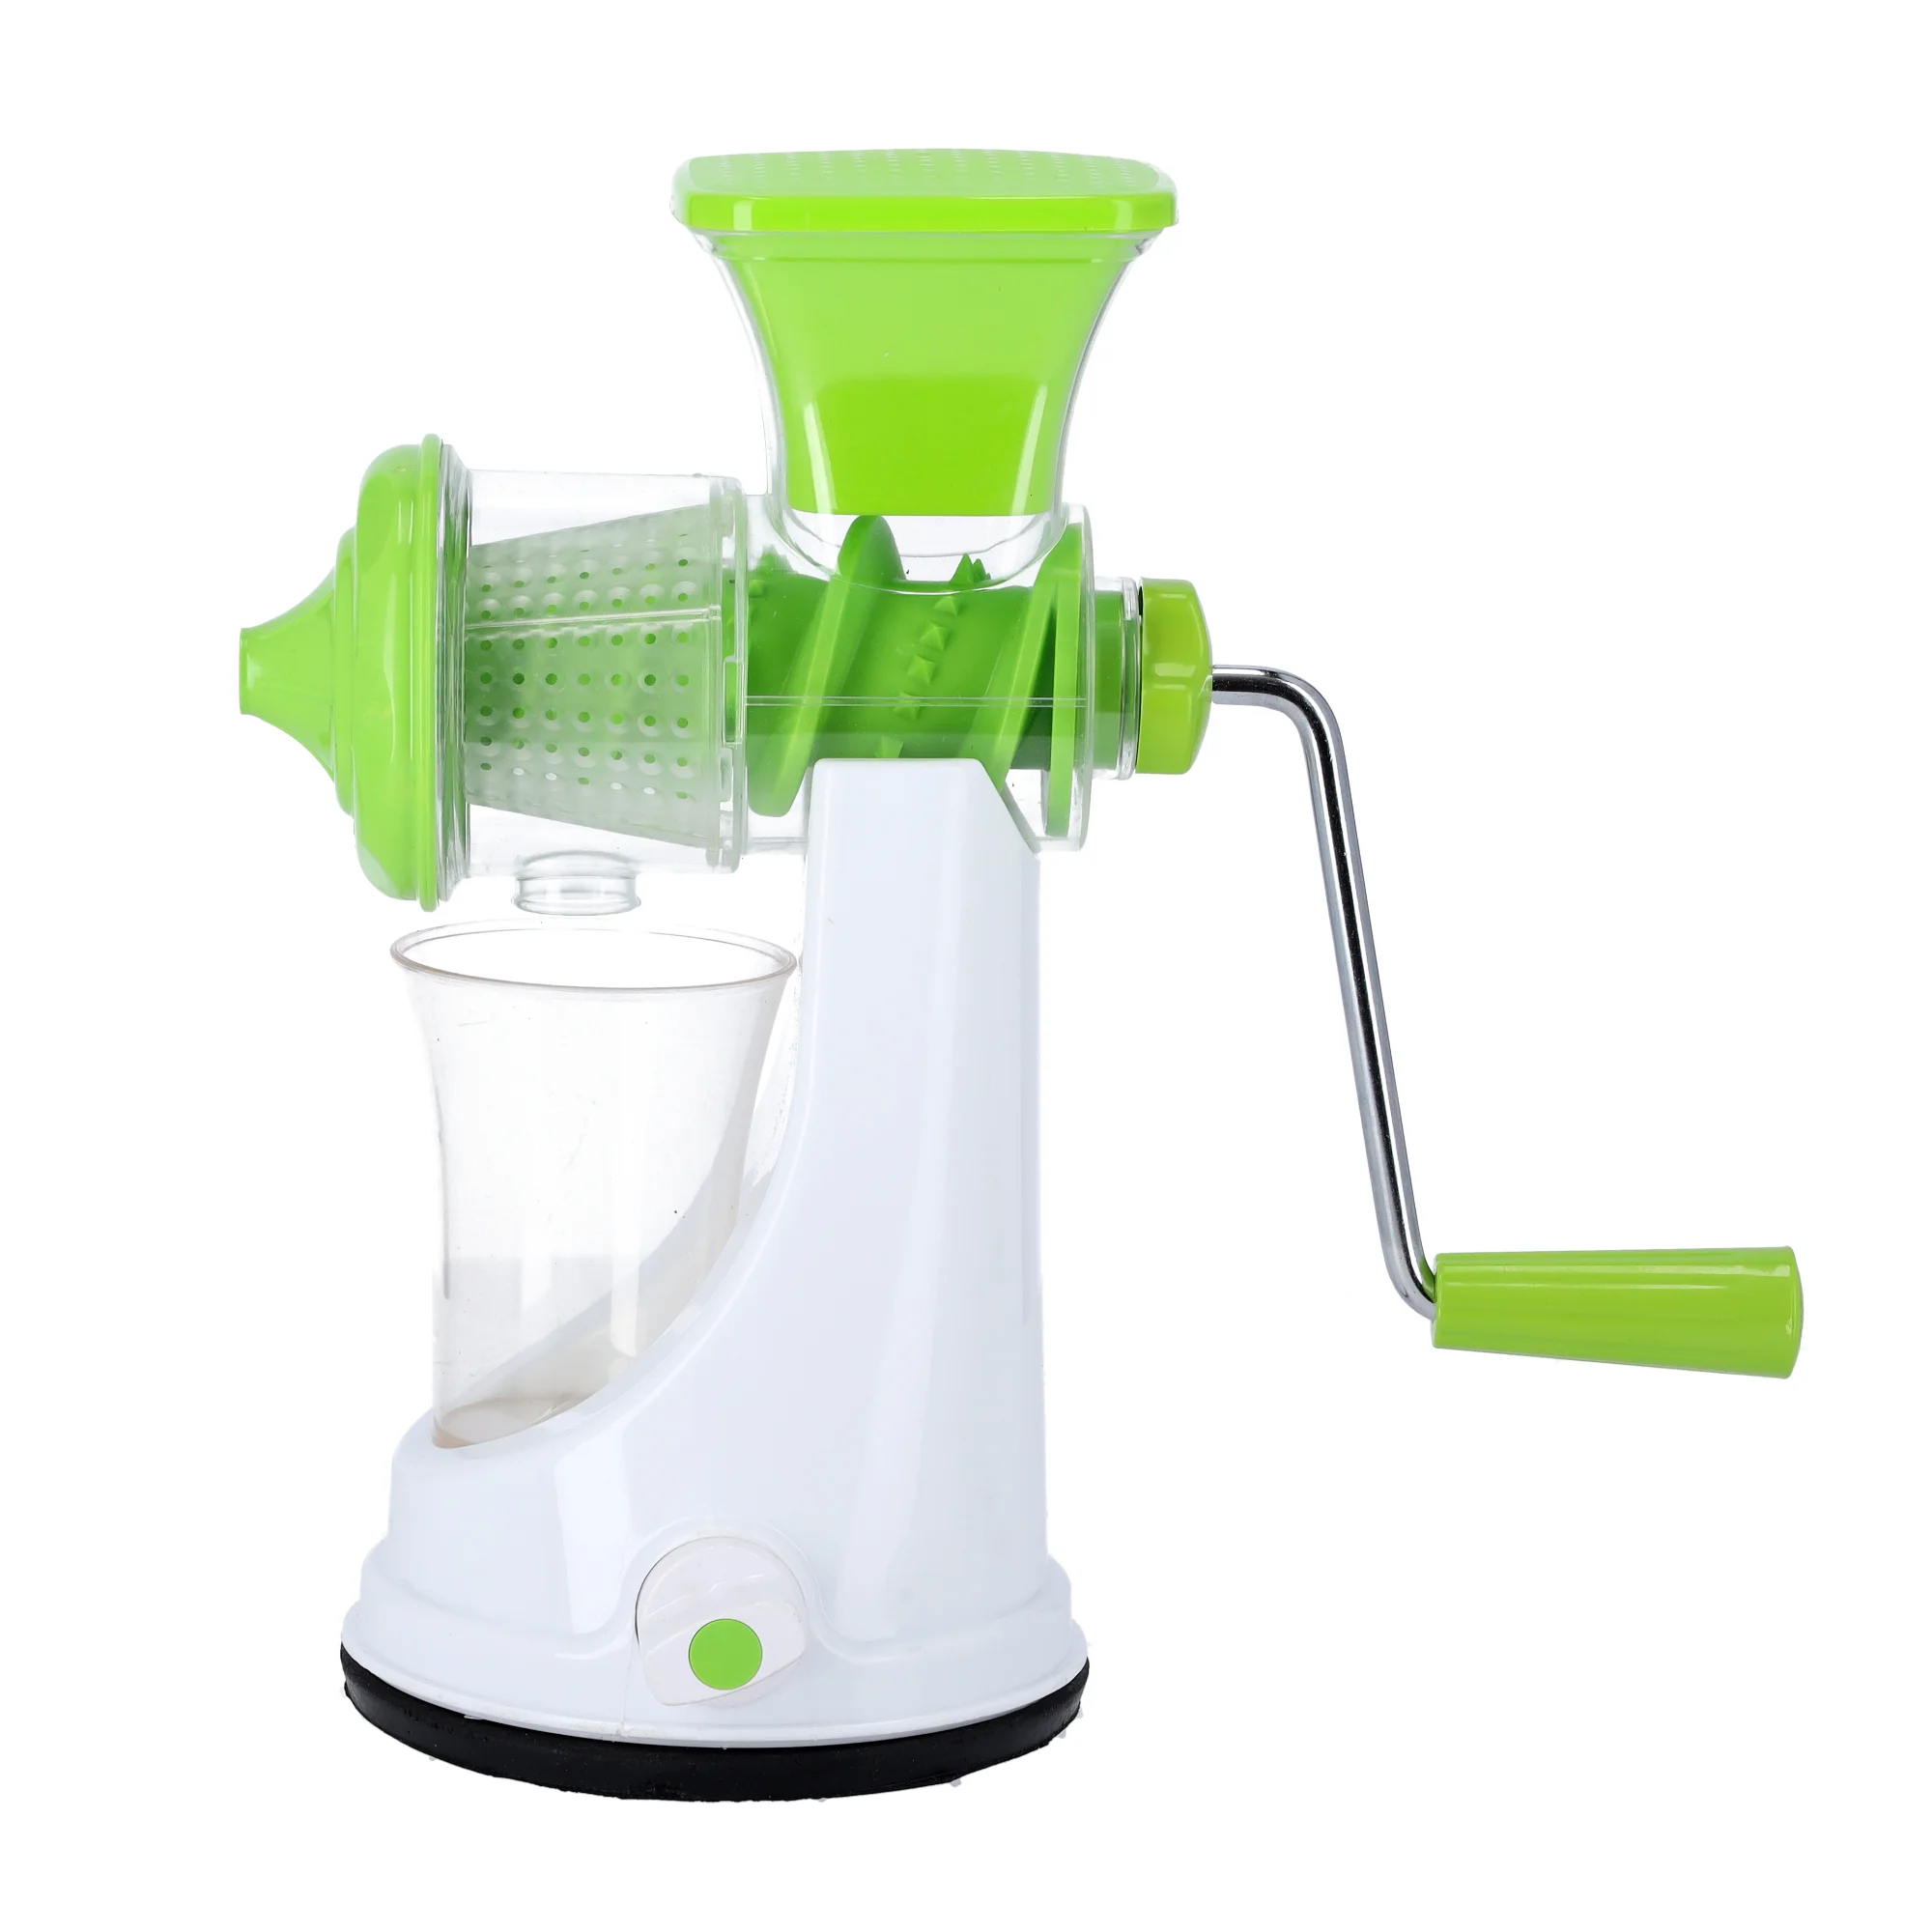 Hand Pull Food Processor - Portable Manual String Vegetable Chopper Small  Kitchen Speed Mincer for Veggie, Garlic, Onion, Ginger, etc, 650 ml, Black  and Red 